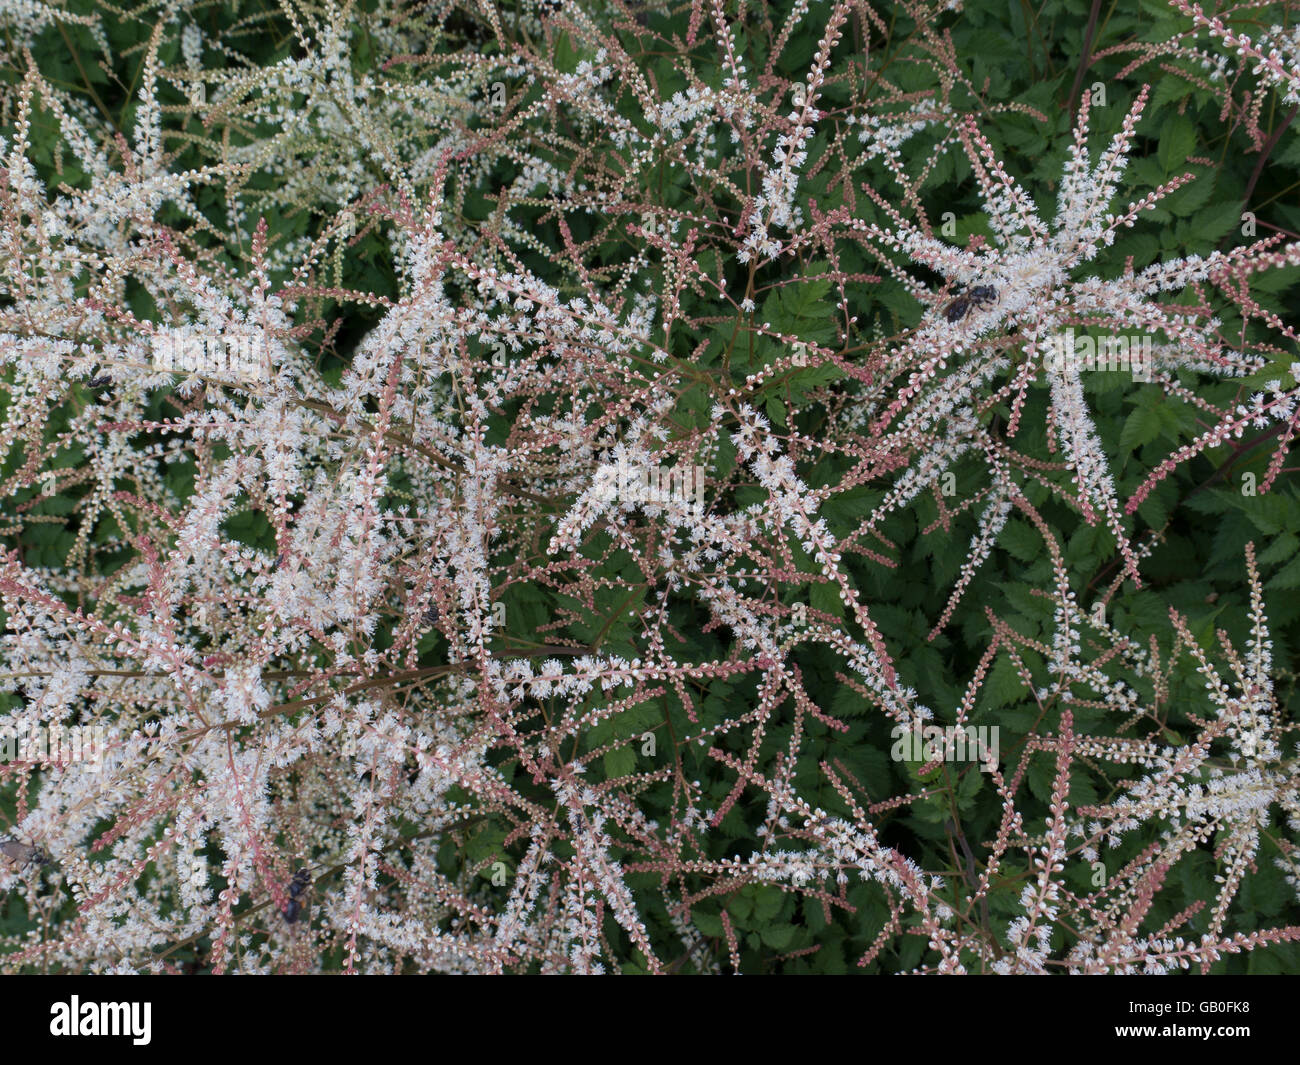 Closeup of an astilbe plant. Stock Photo